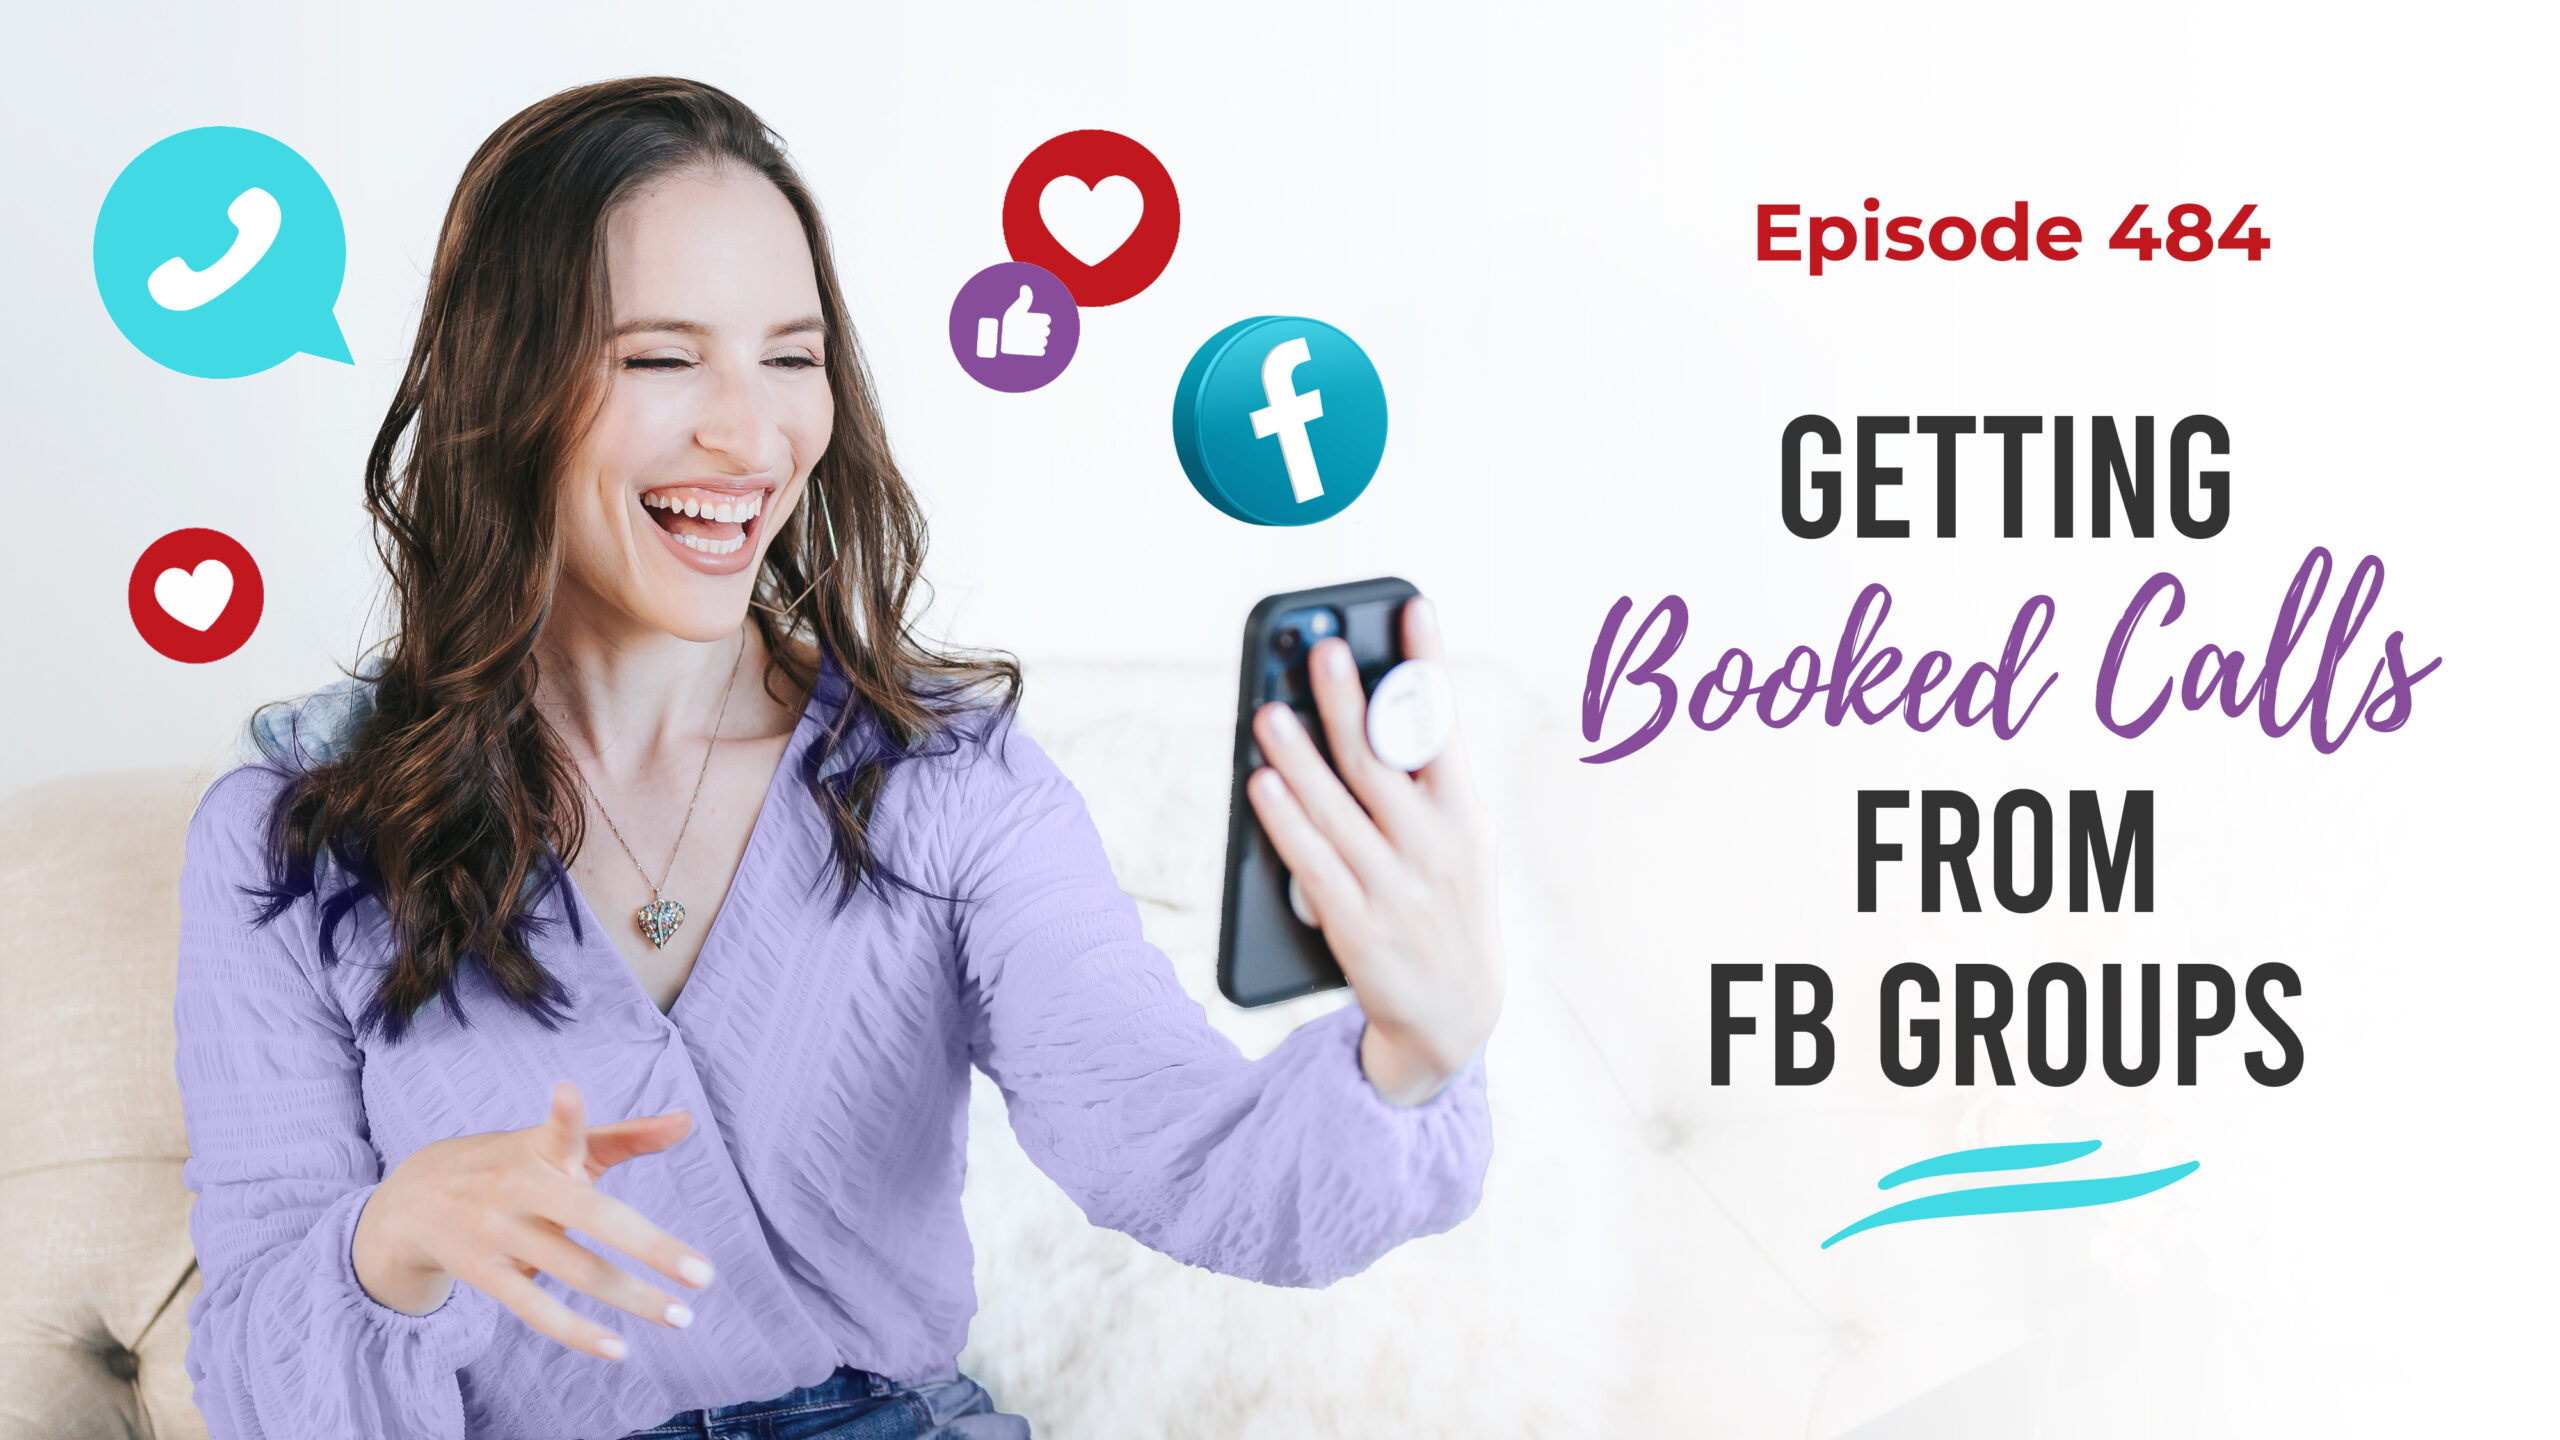 Ep. 484: Getting Booked Calls From Facebook Groups